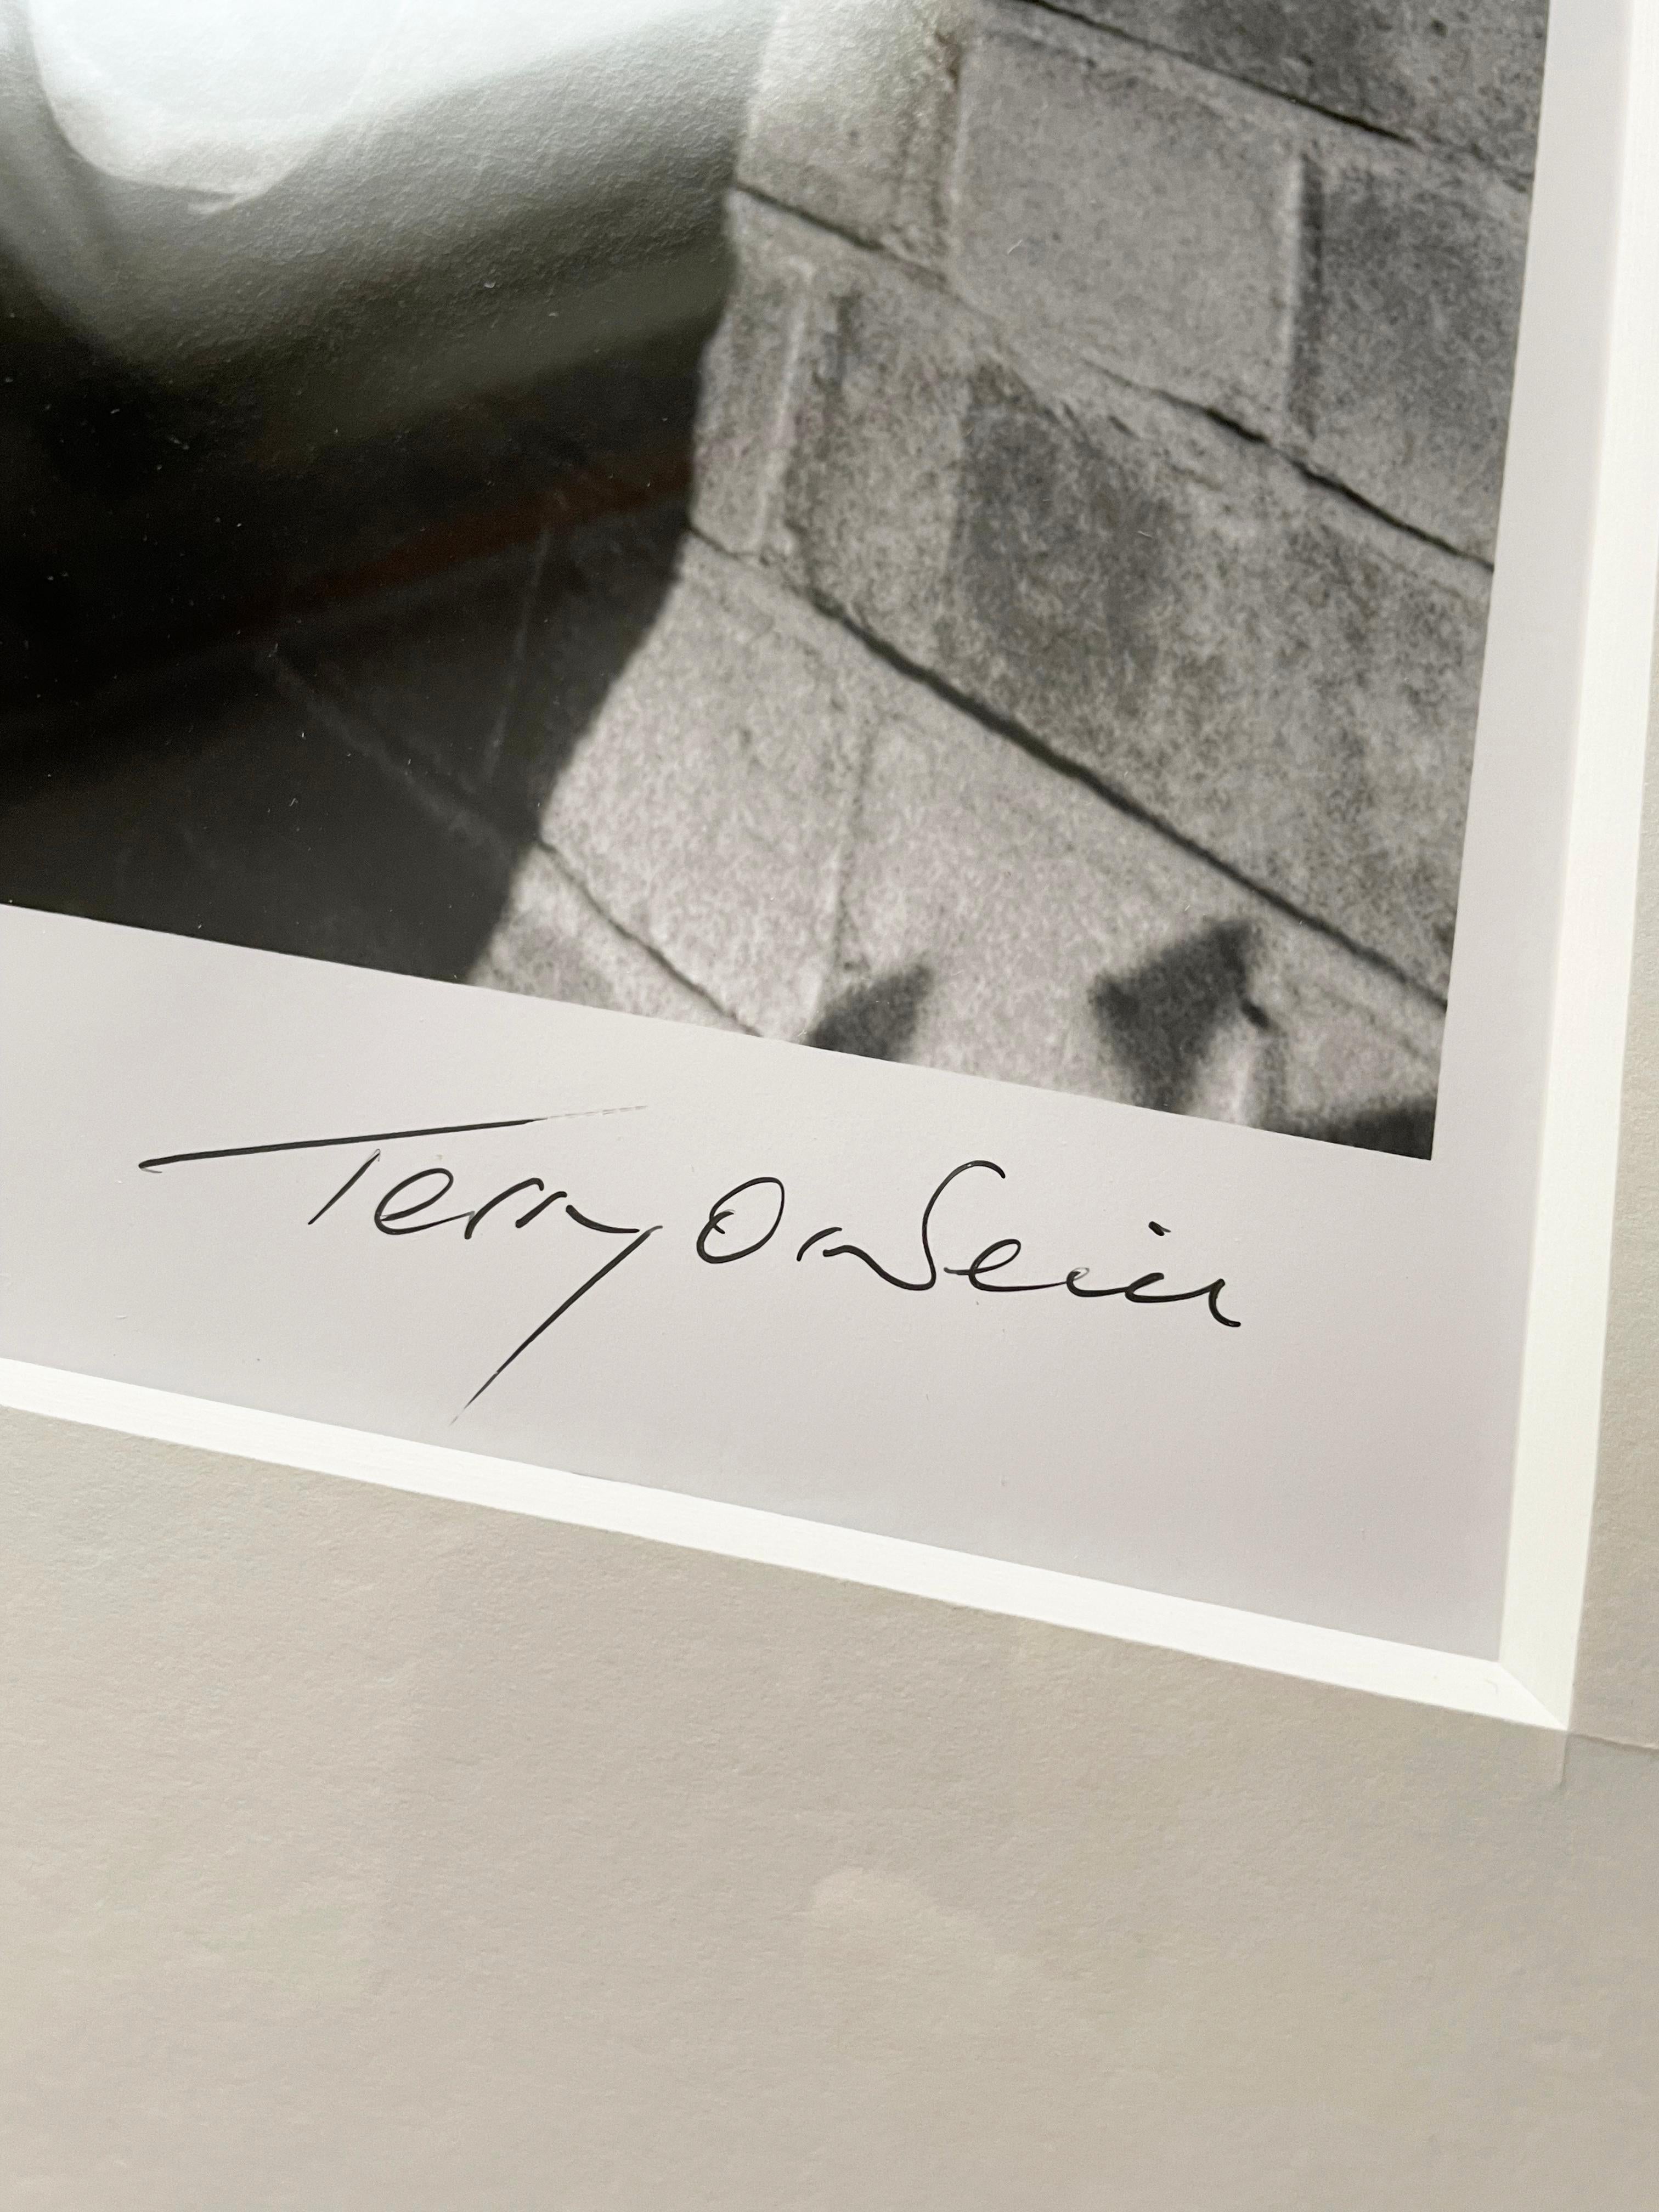 Paper size : 24 x 20 inches, Image size : 23 x 15 inches. Lifetime silver gelatin print
No 49/50 signed lower right margin.

Terry O’Neill CBE is one of the world’s most collected photographers, with work hanging in national art galleries and